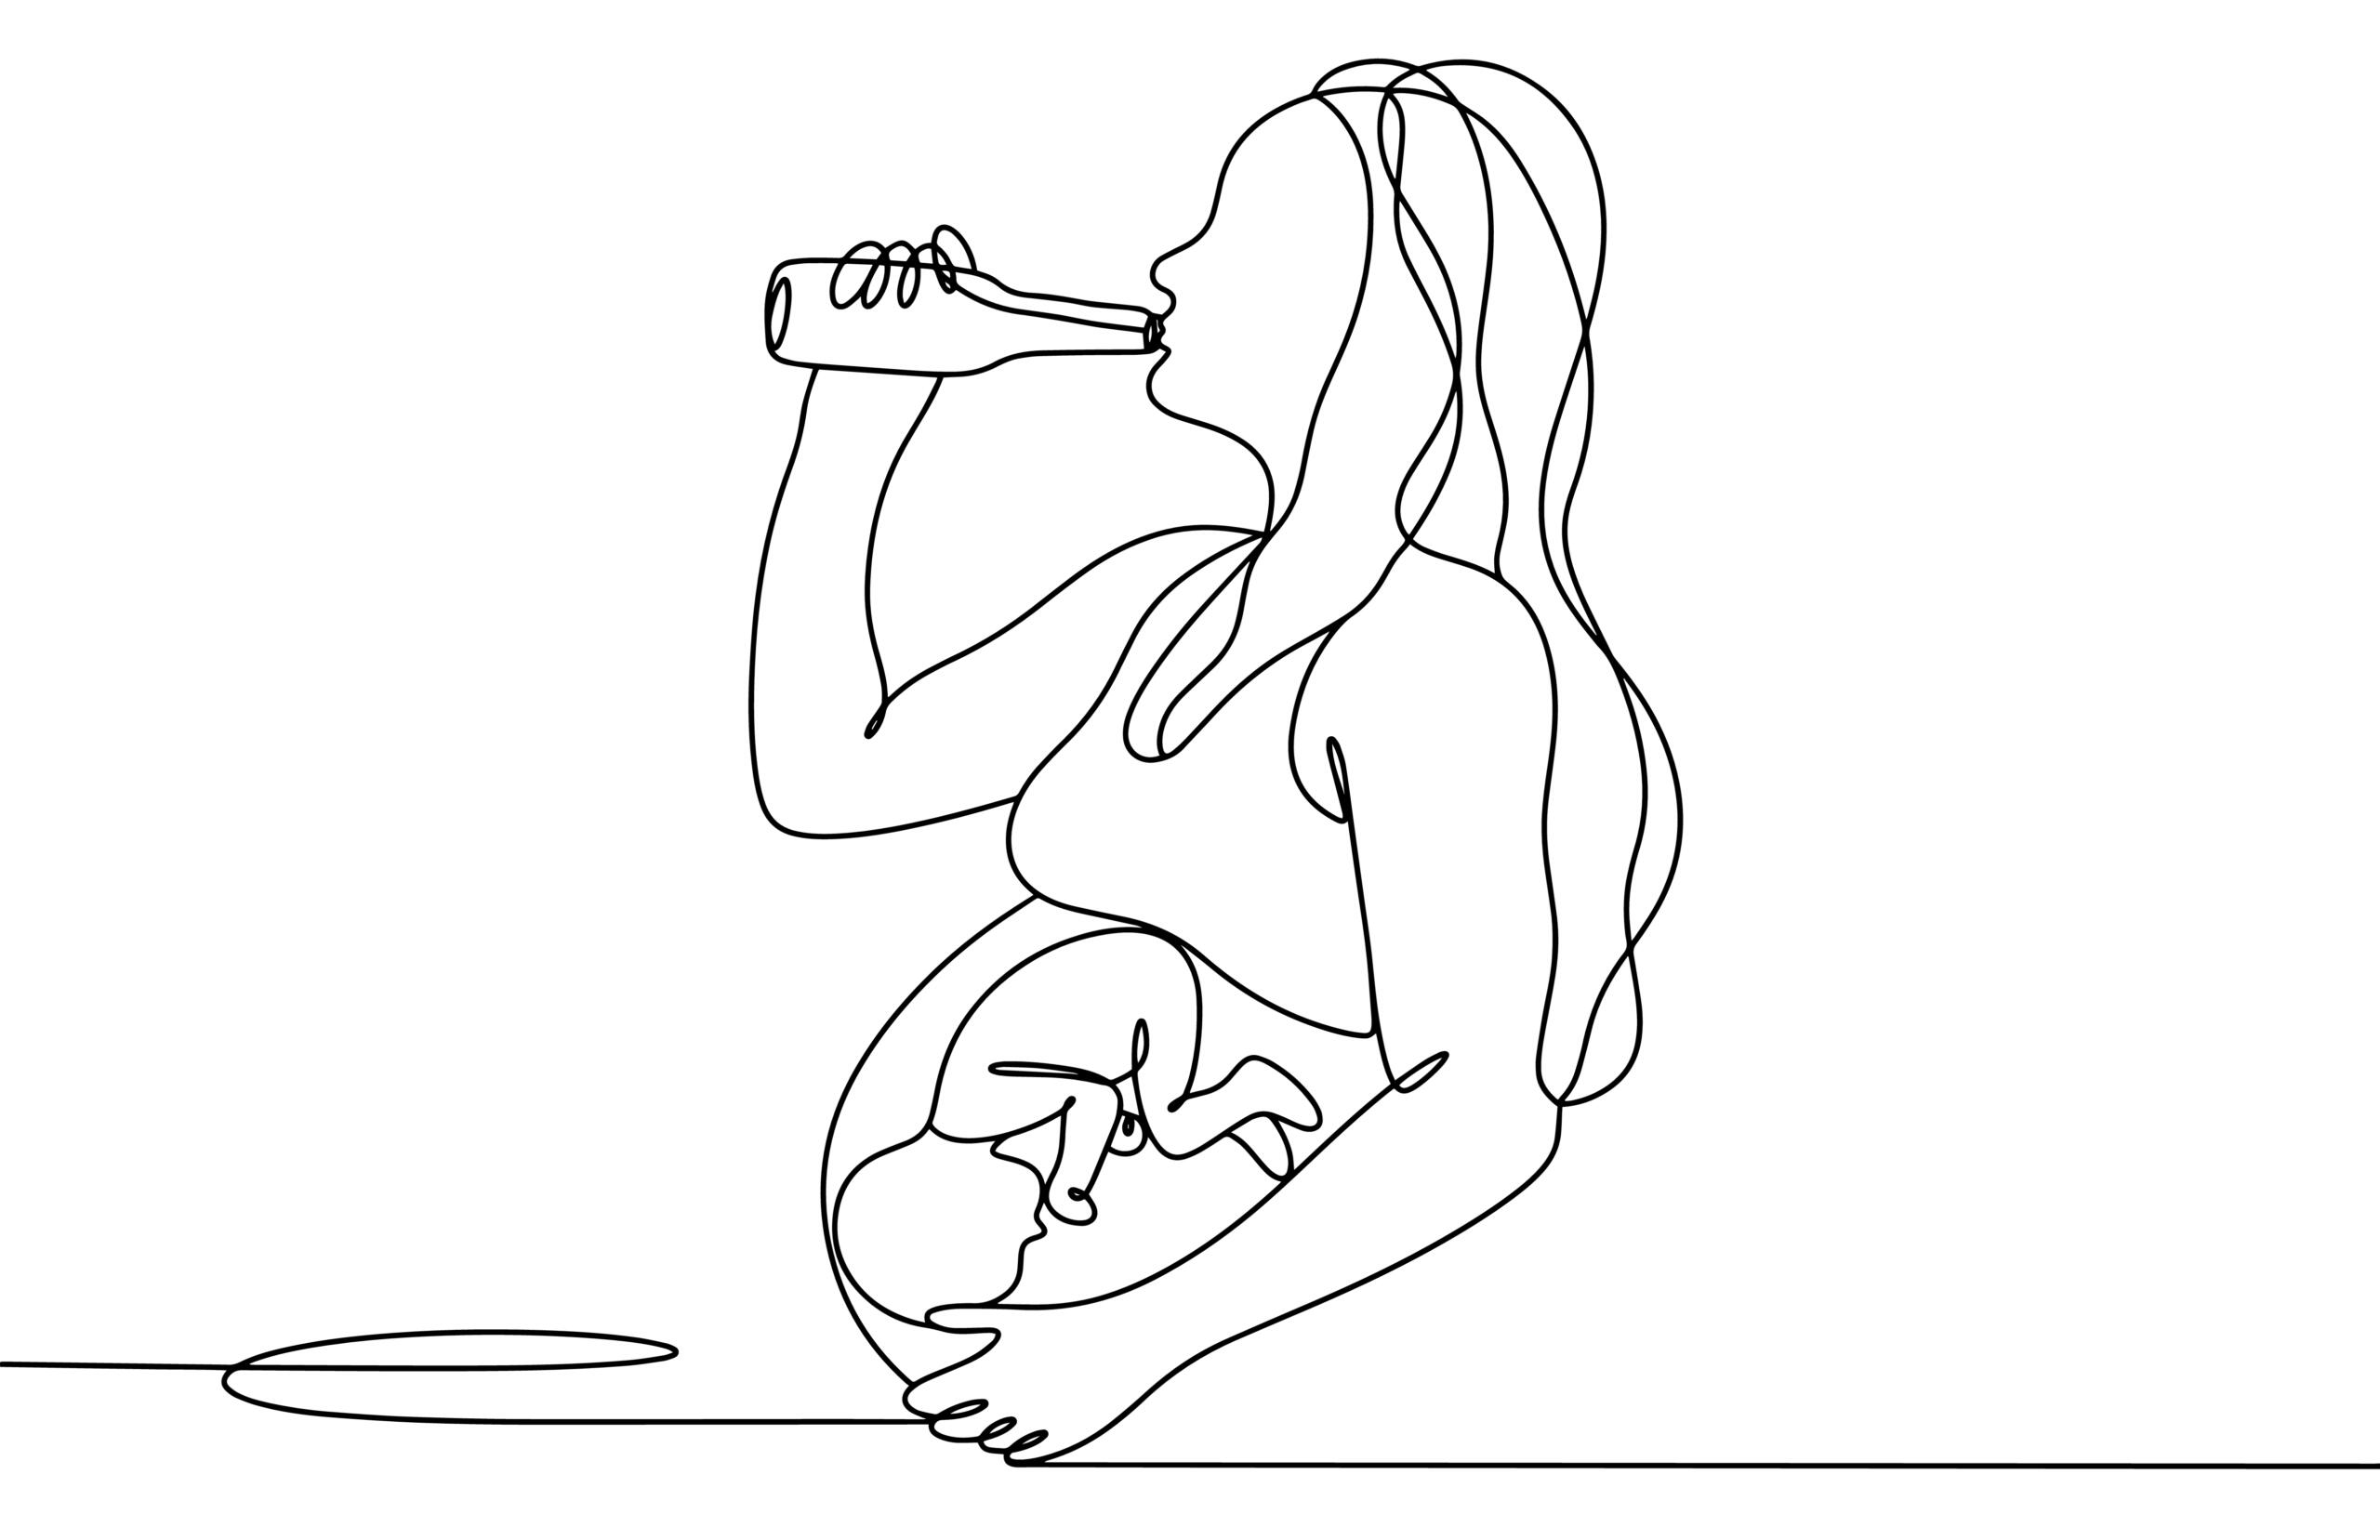 Understanding Foetal Alcohol Spectrum Disorders: Causes, Effects, and Prevention